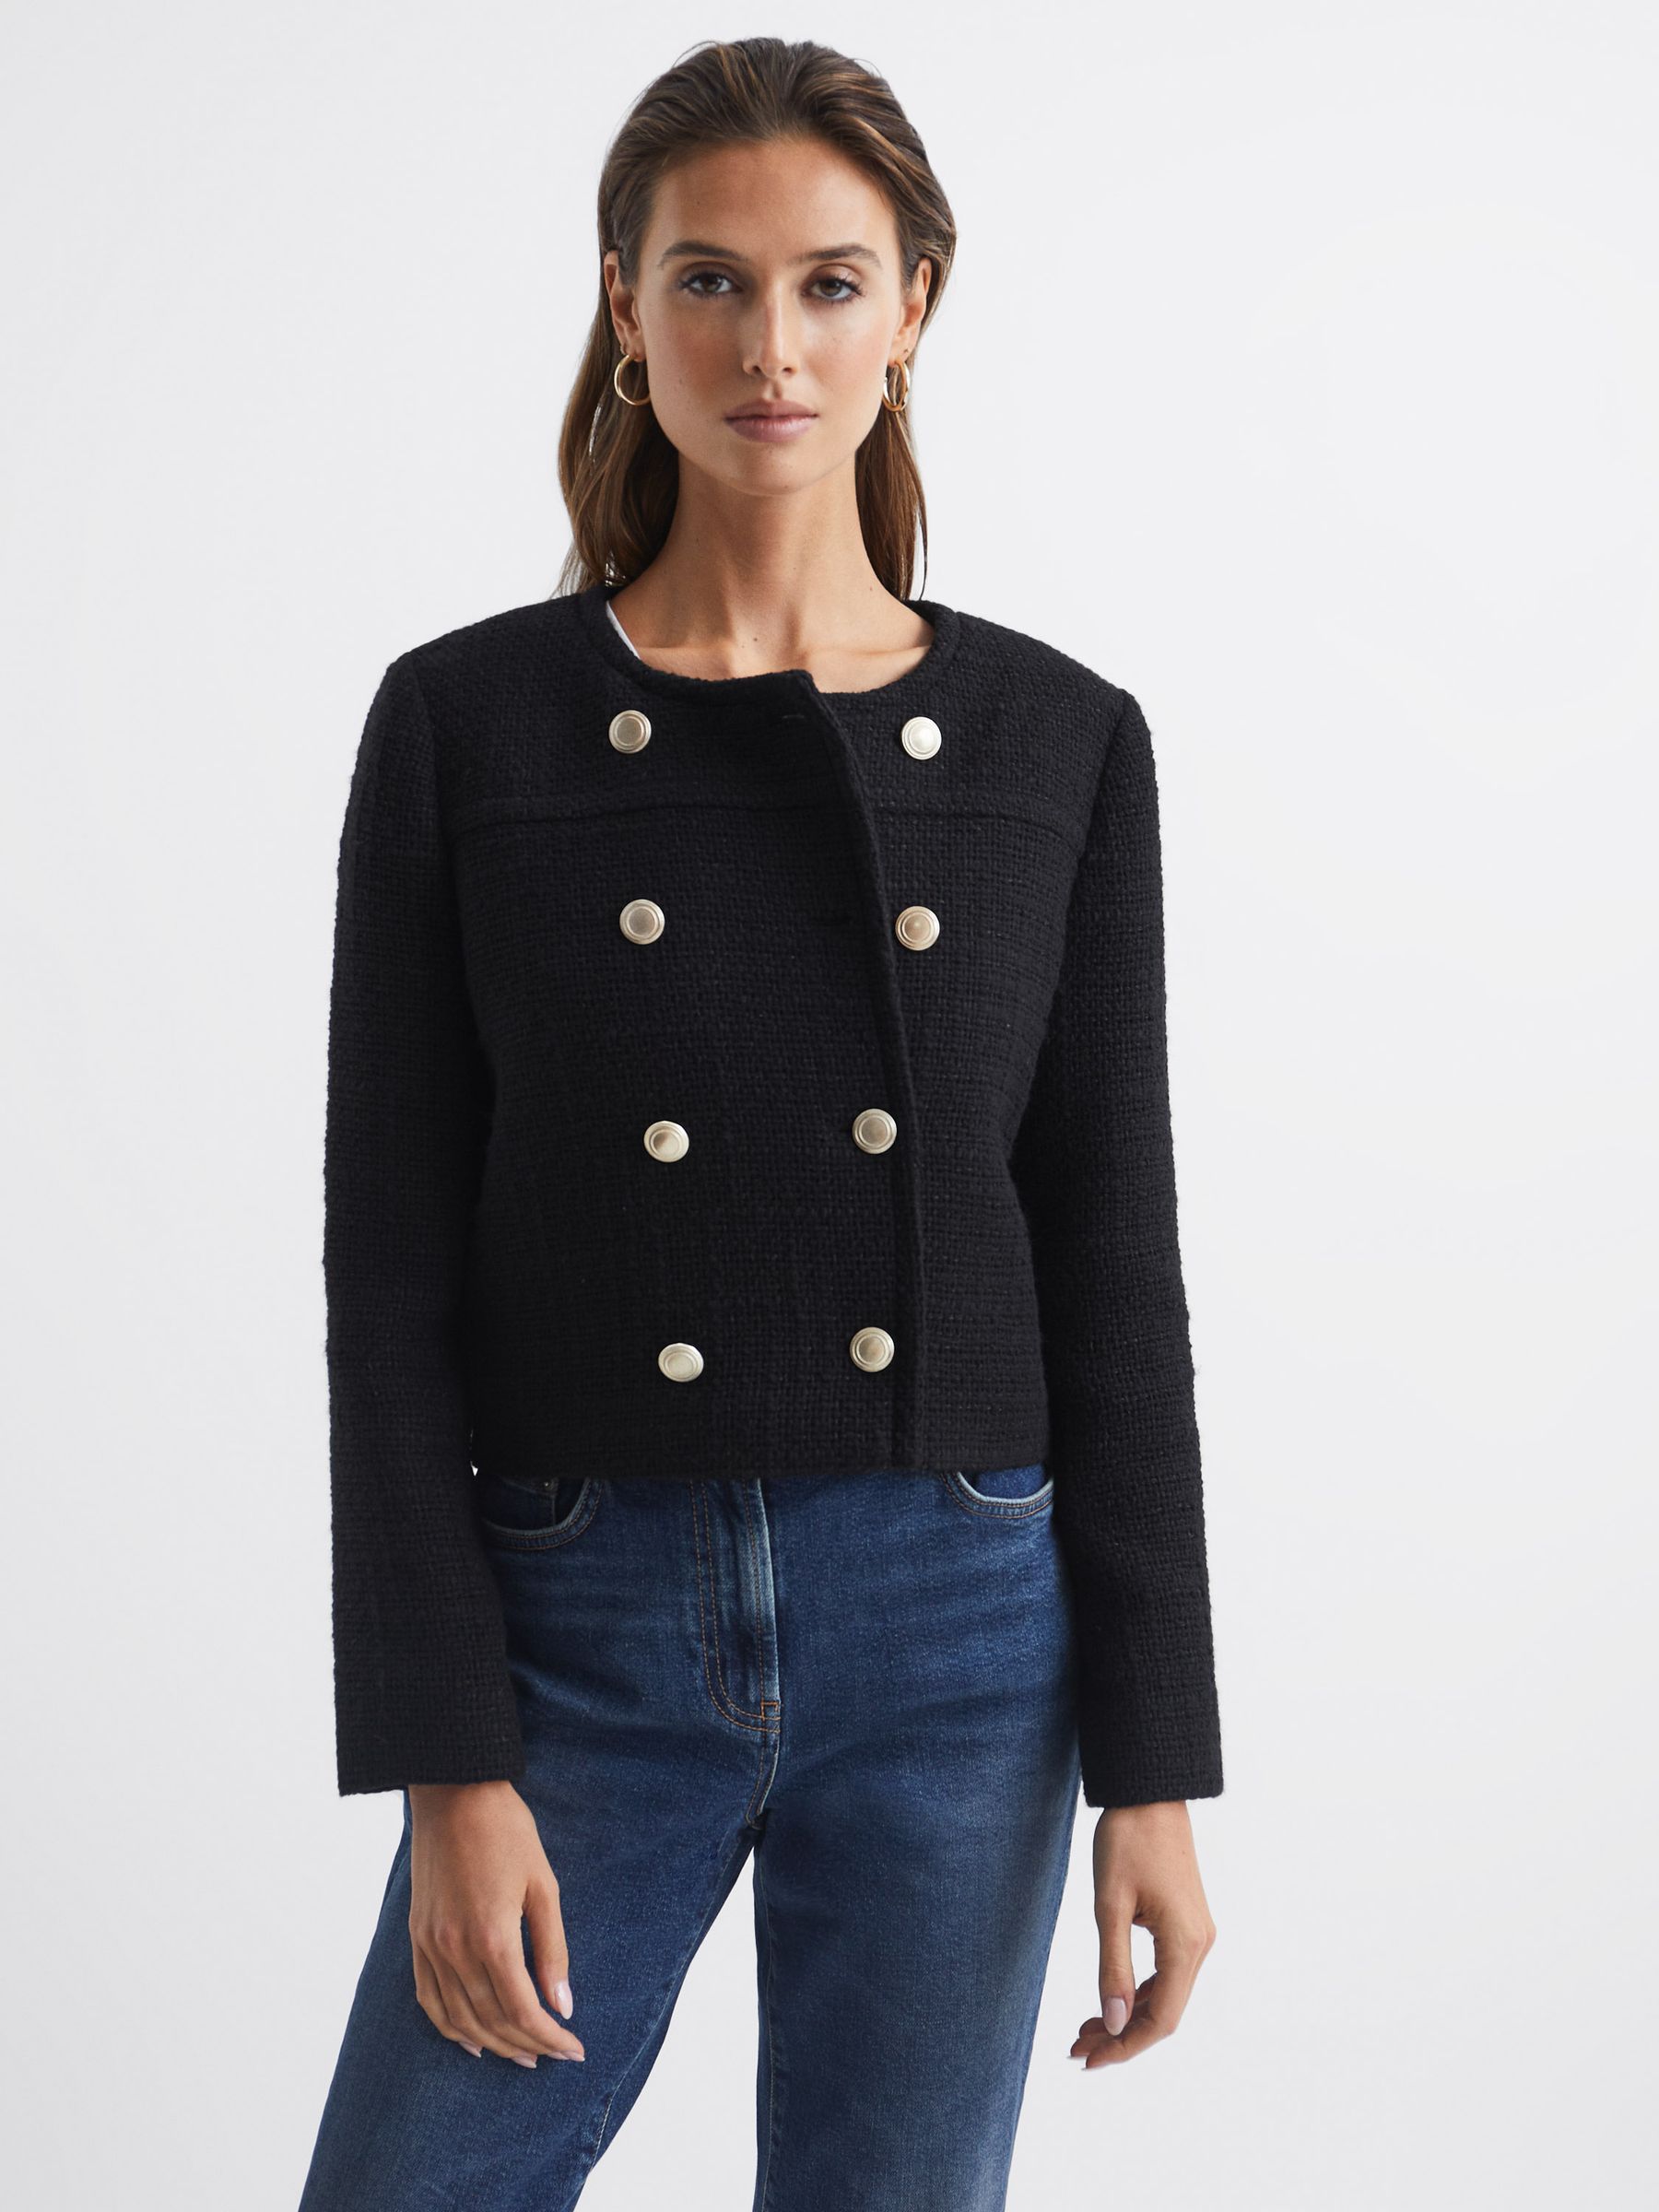 Reiss Esmie Cropped Double Breasted Jacket - REISS